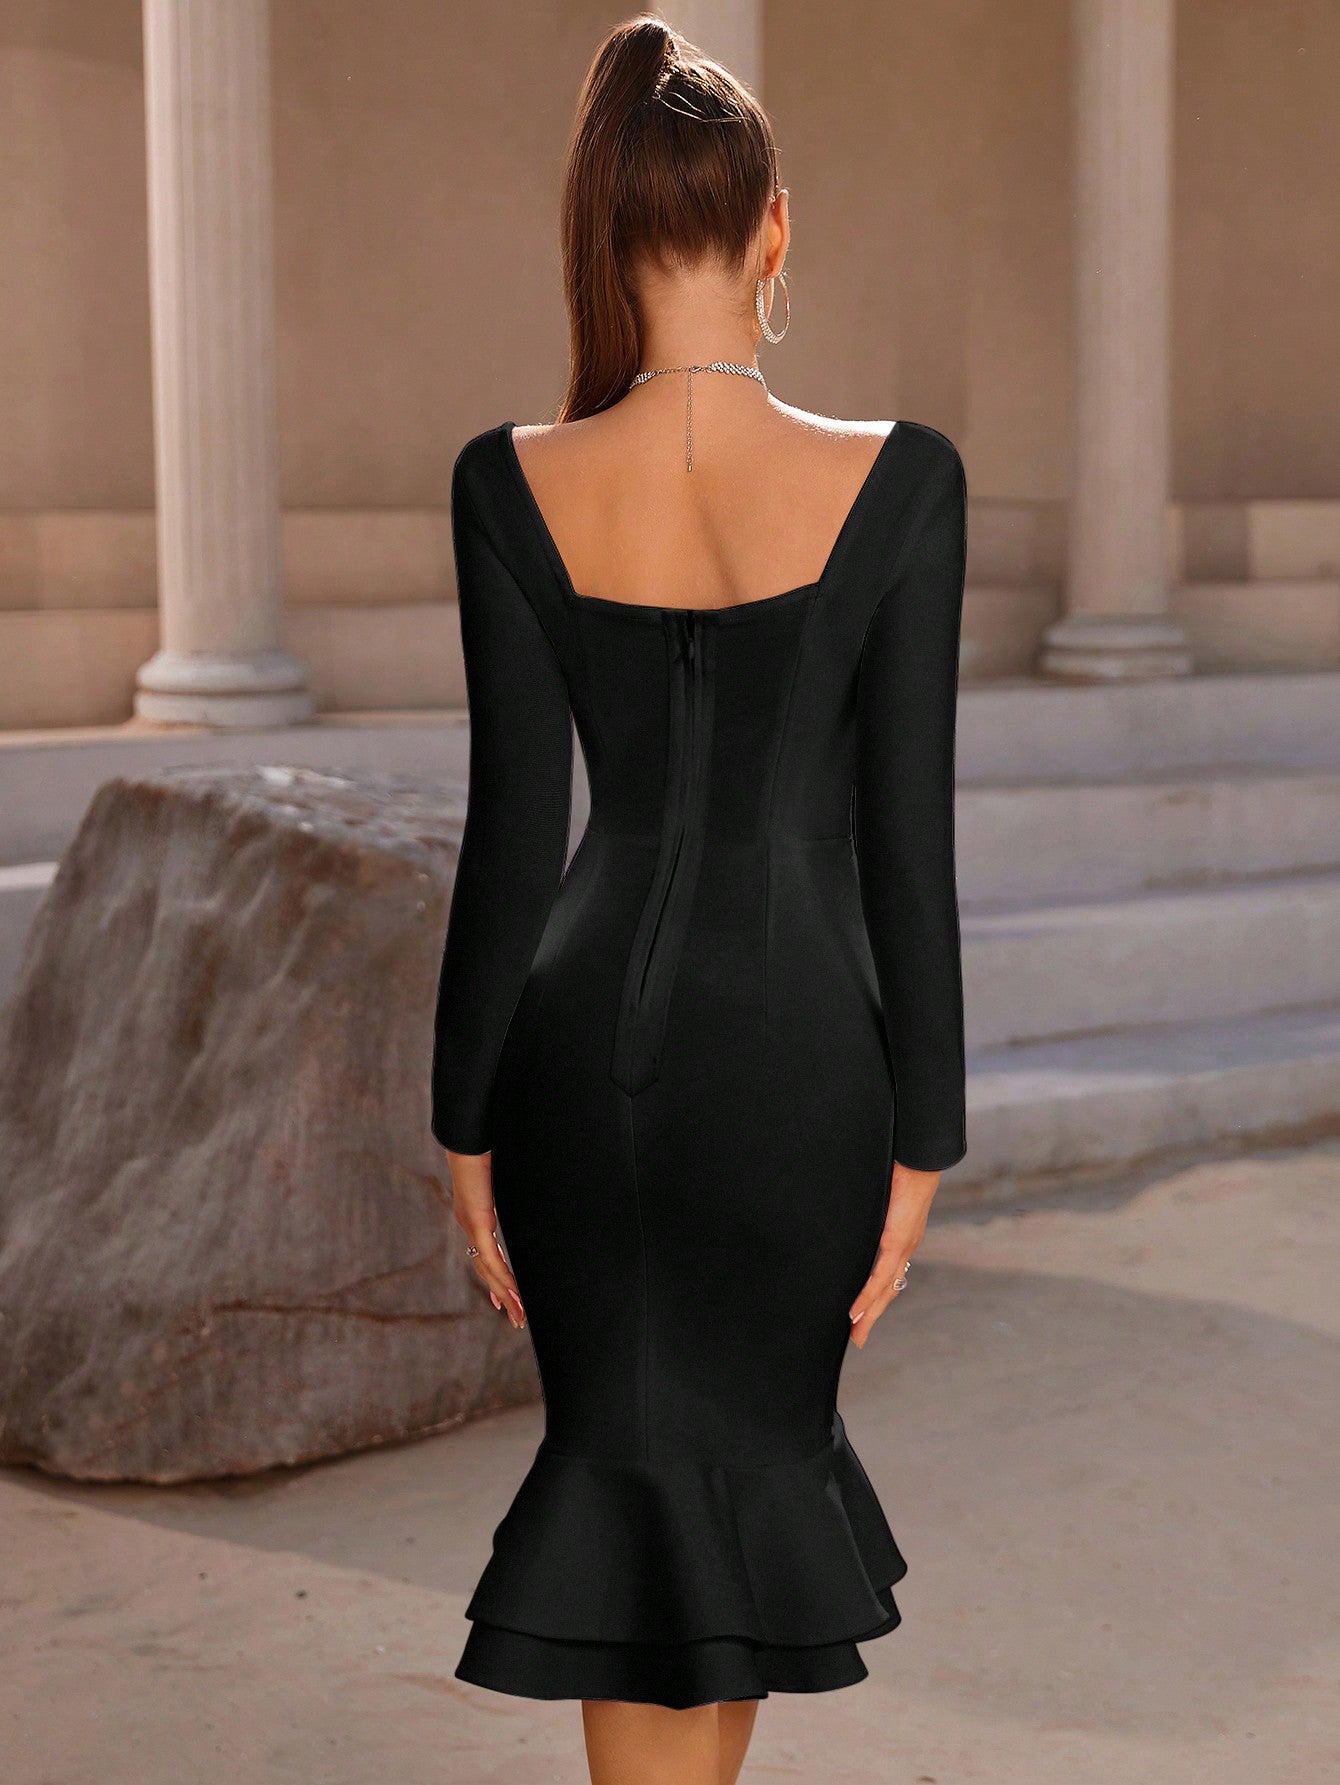 LLstyle- Square Neck Button Front Backless Dress